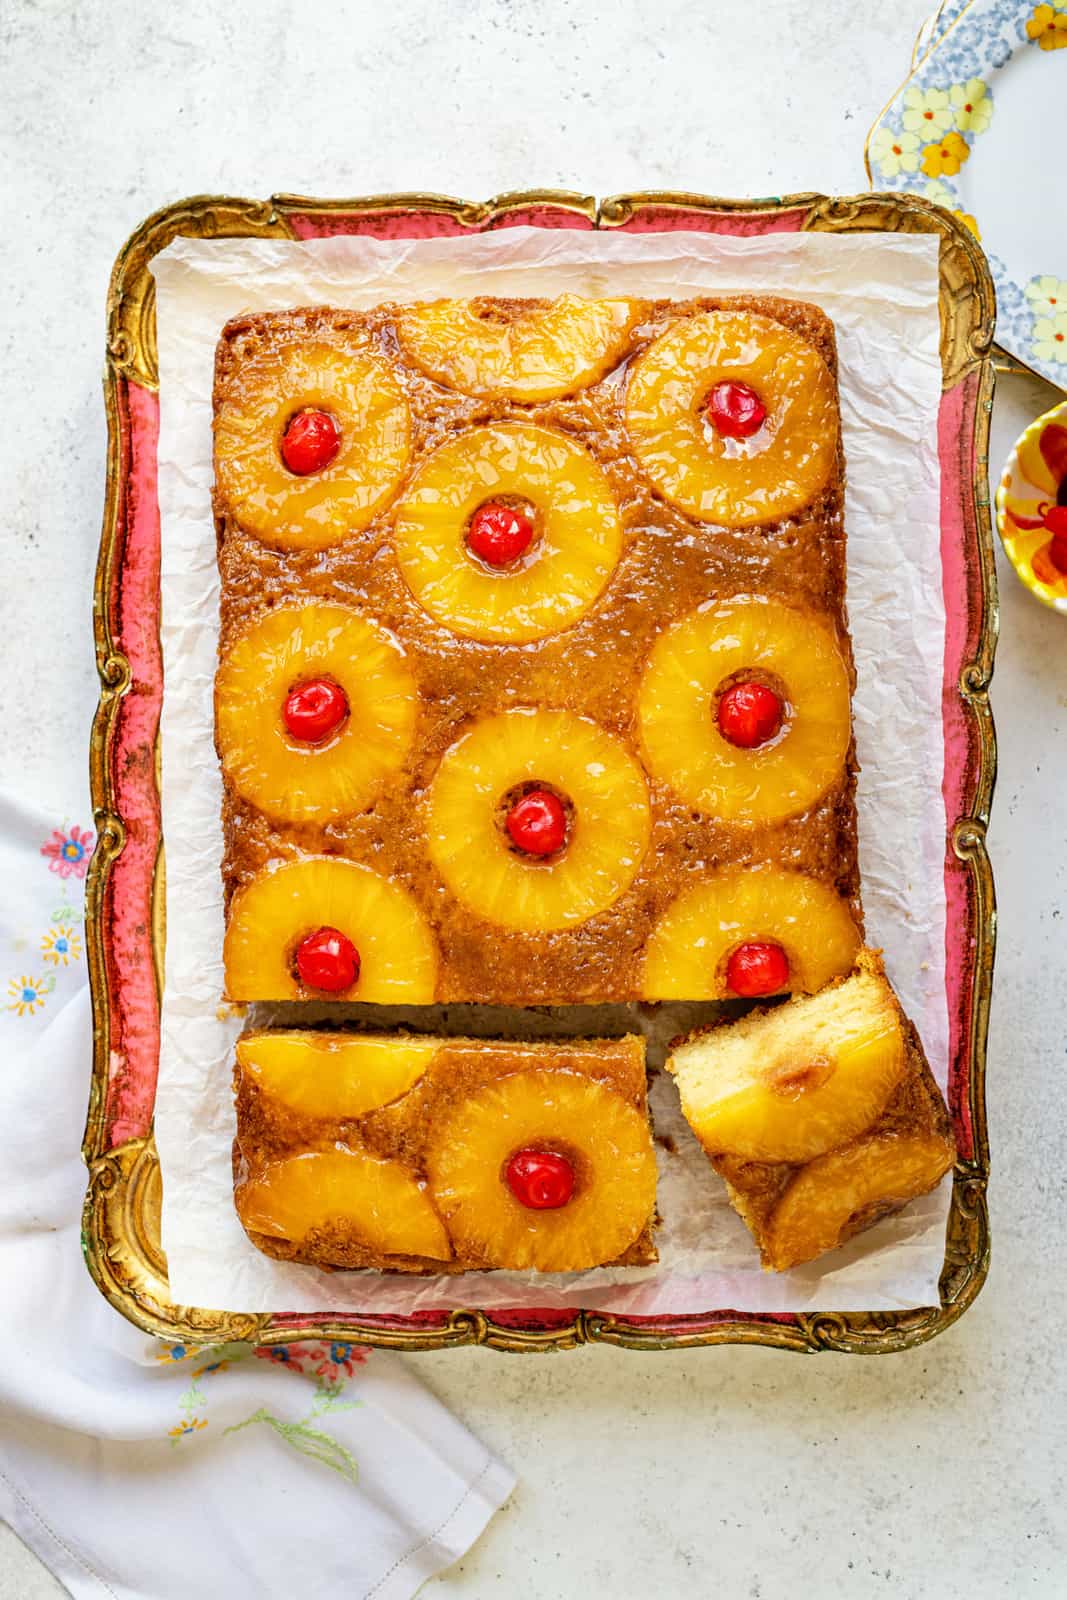 Pineapple Upside Down Cake shown on a decorative tray